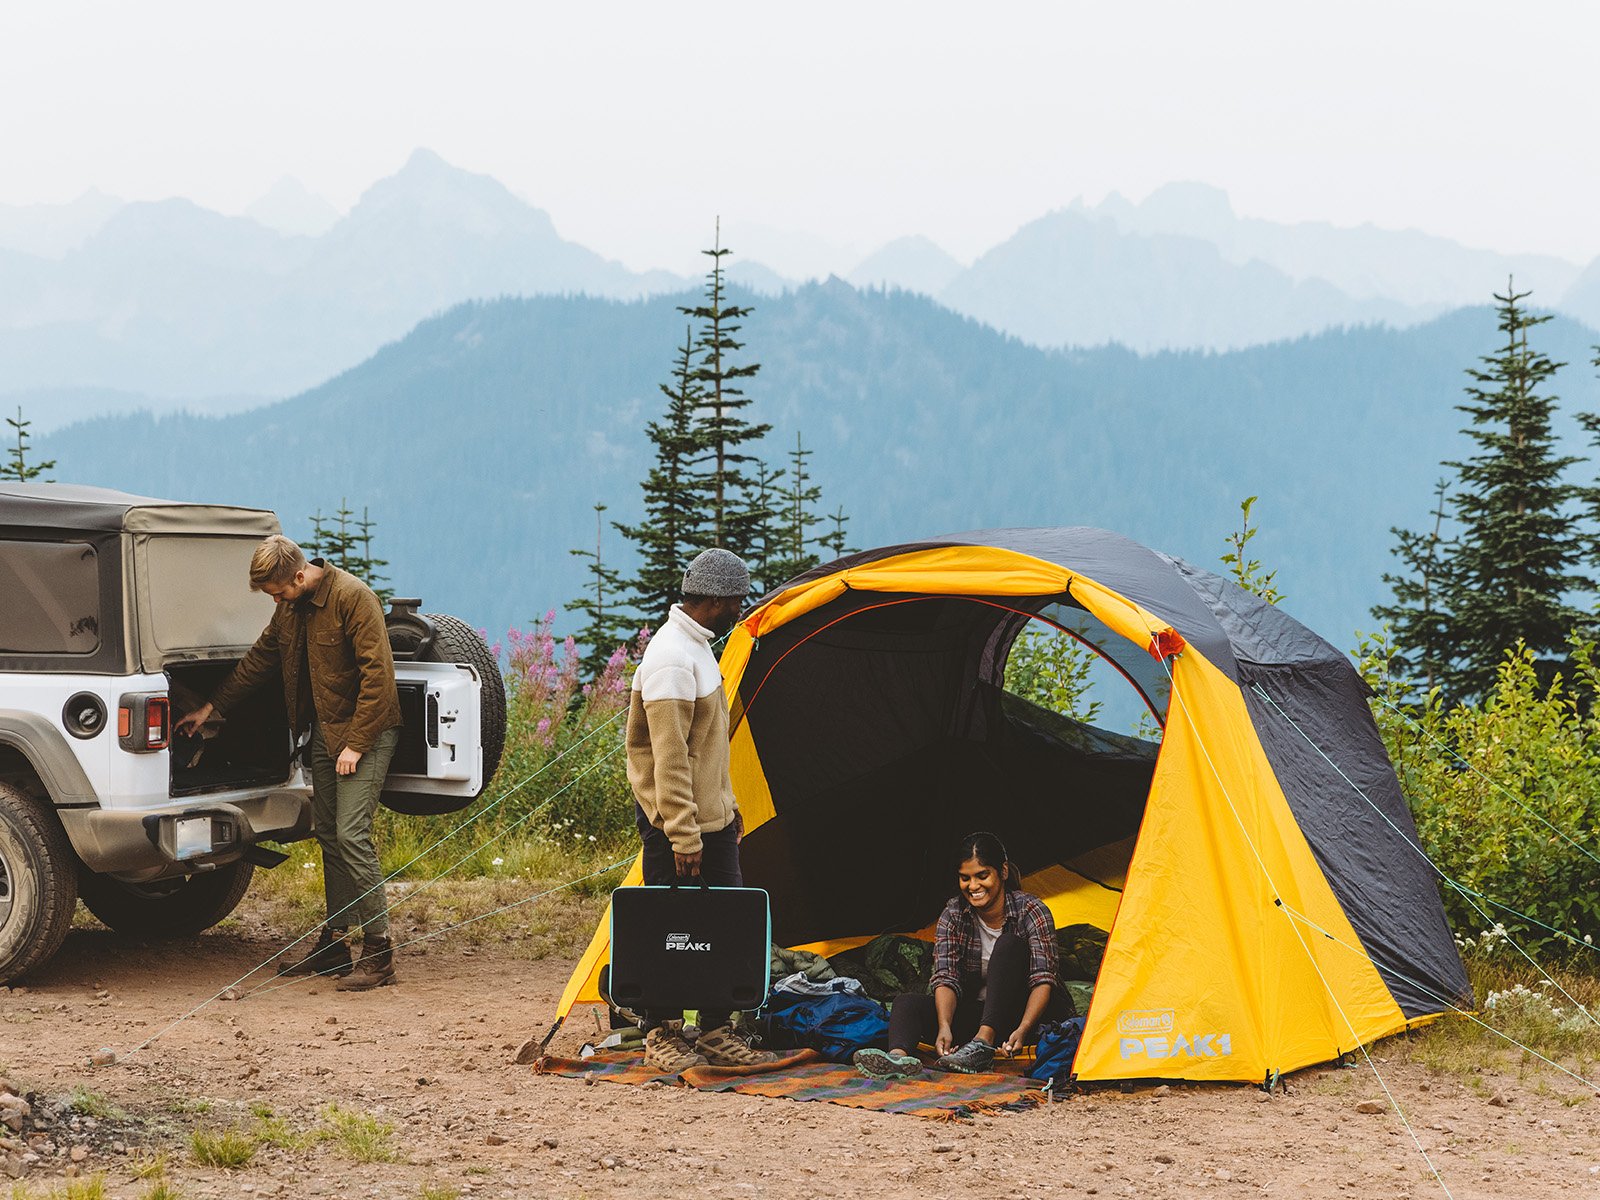 outdoor campsite with three hikers and yellow and gray tent